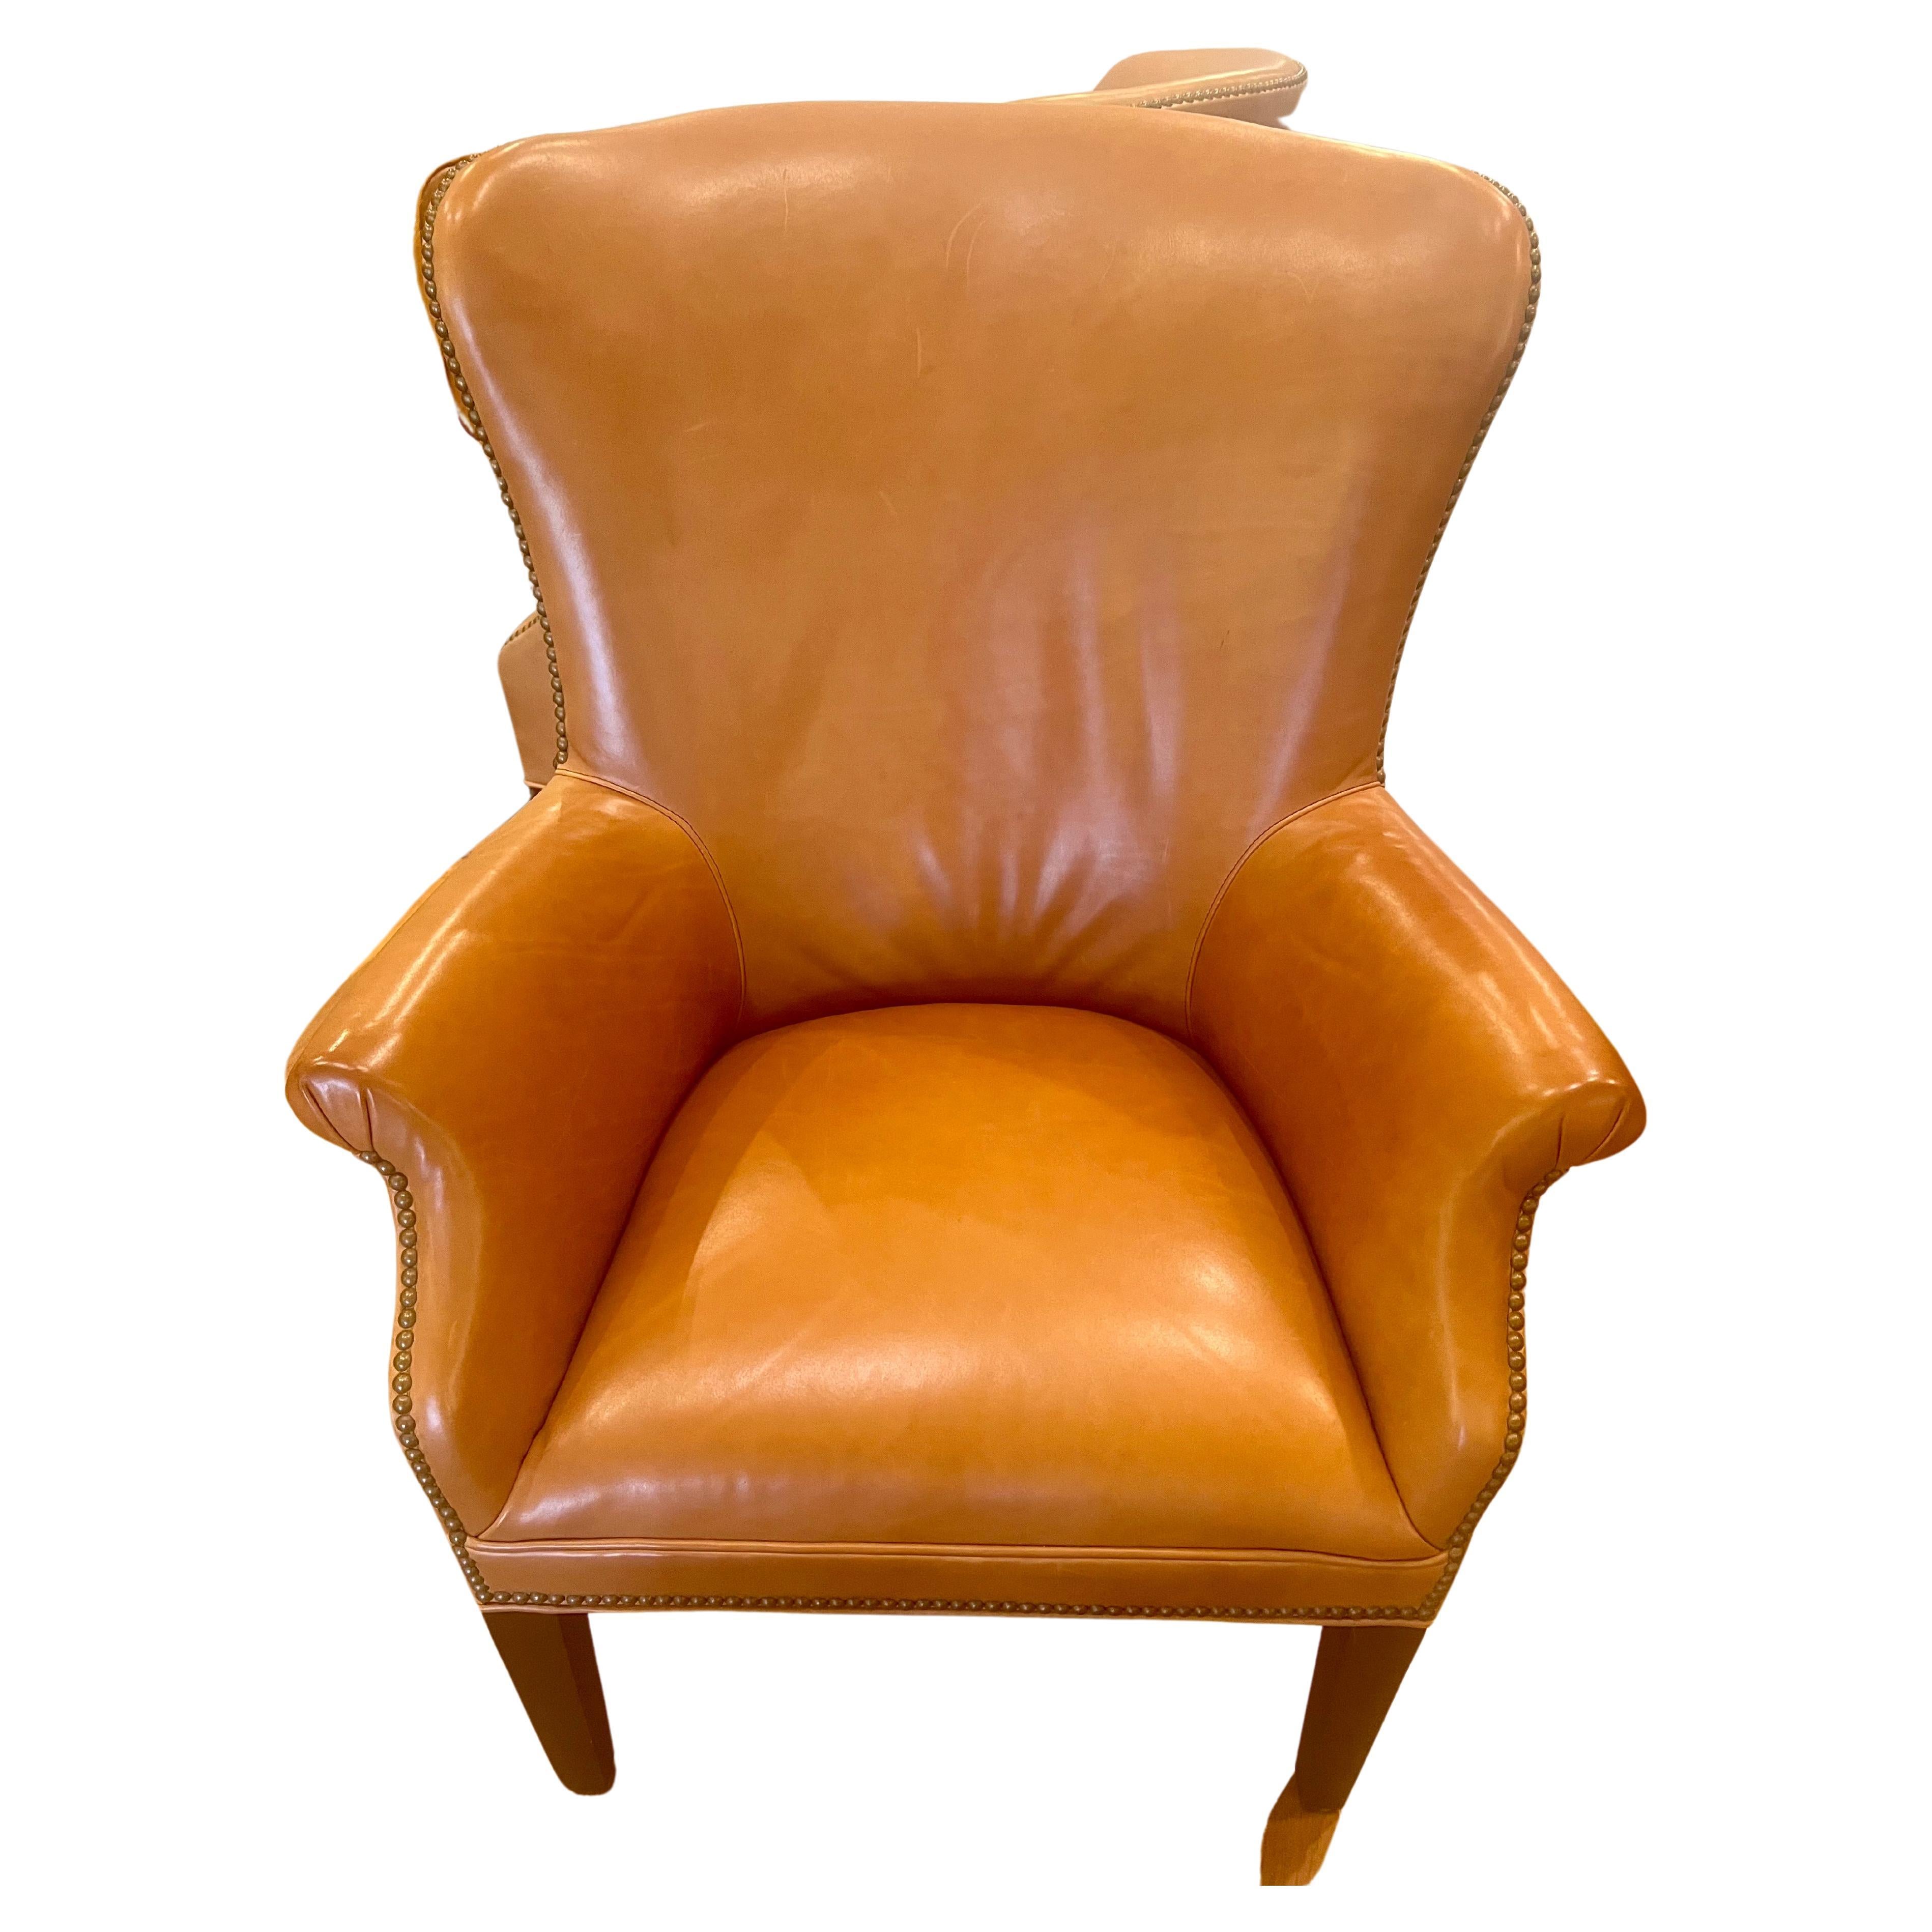 American Classical Pair of Contemporary Caramel Leather Wingback Armchairs by Williams Sonoma